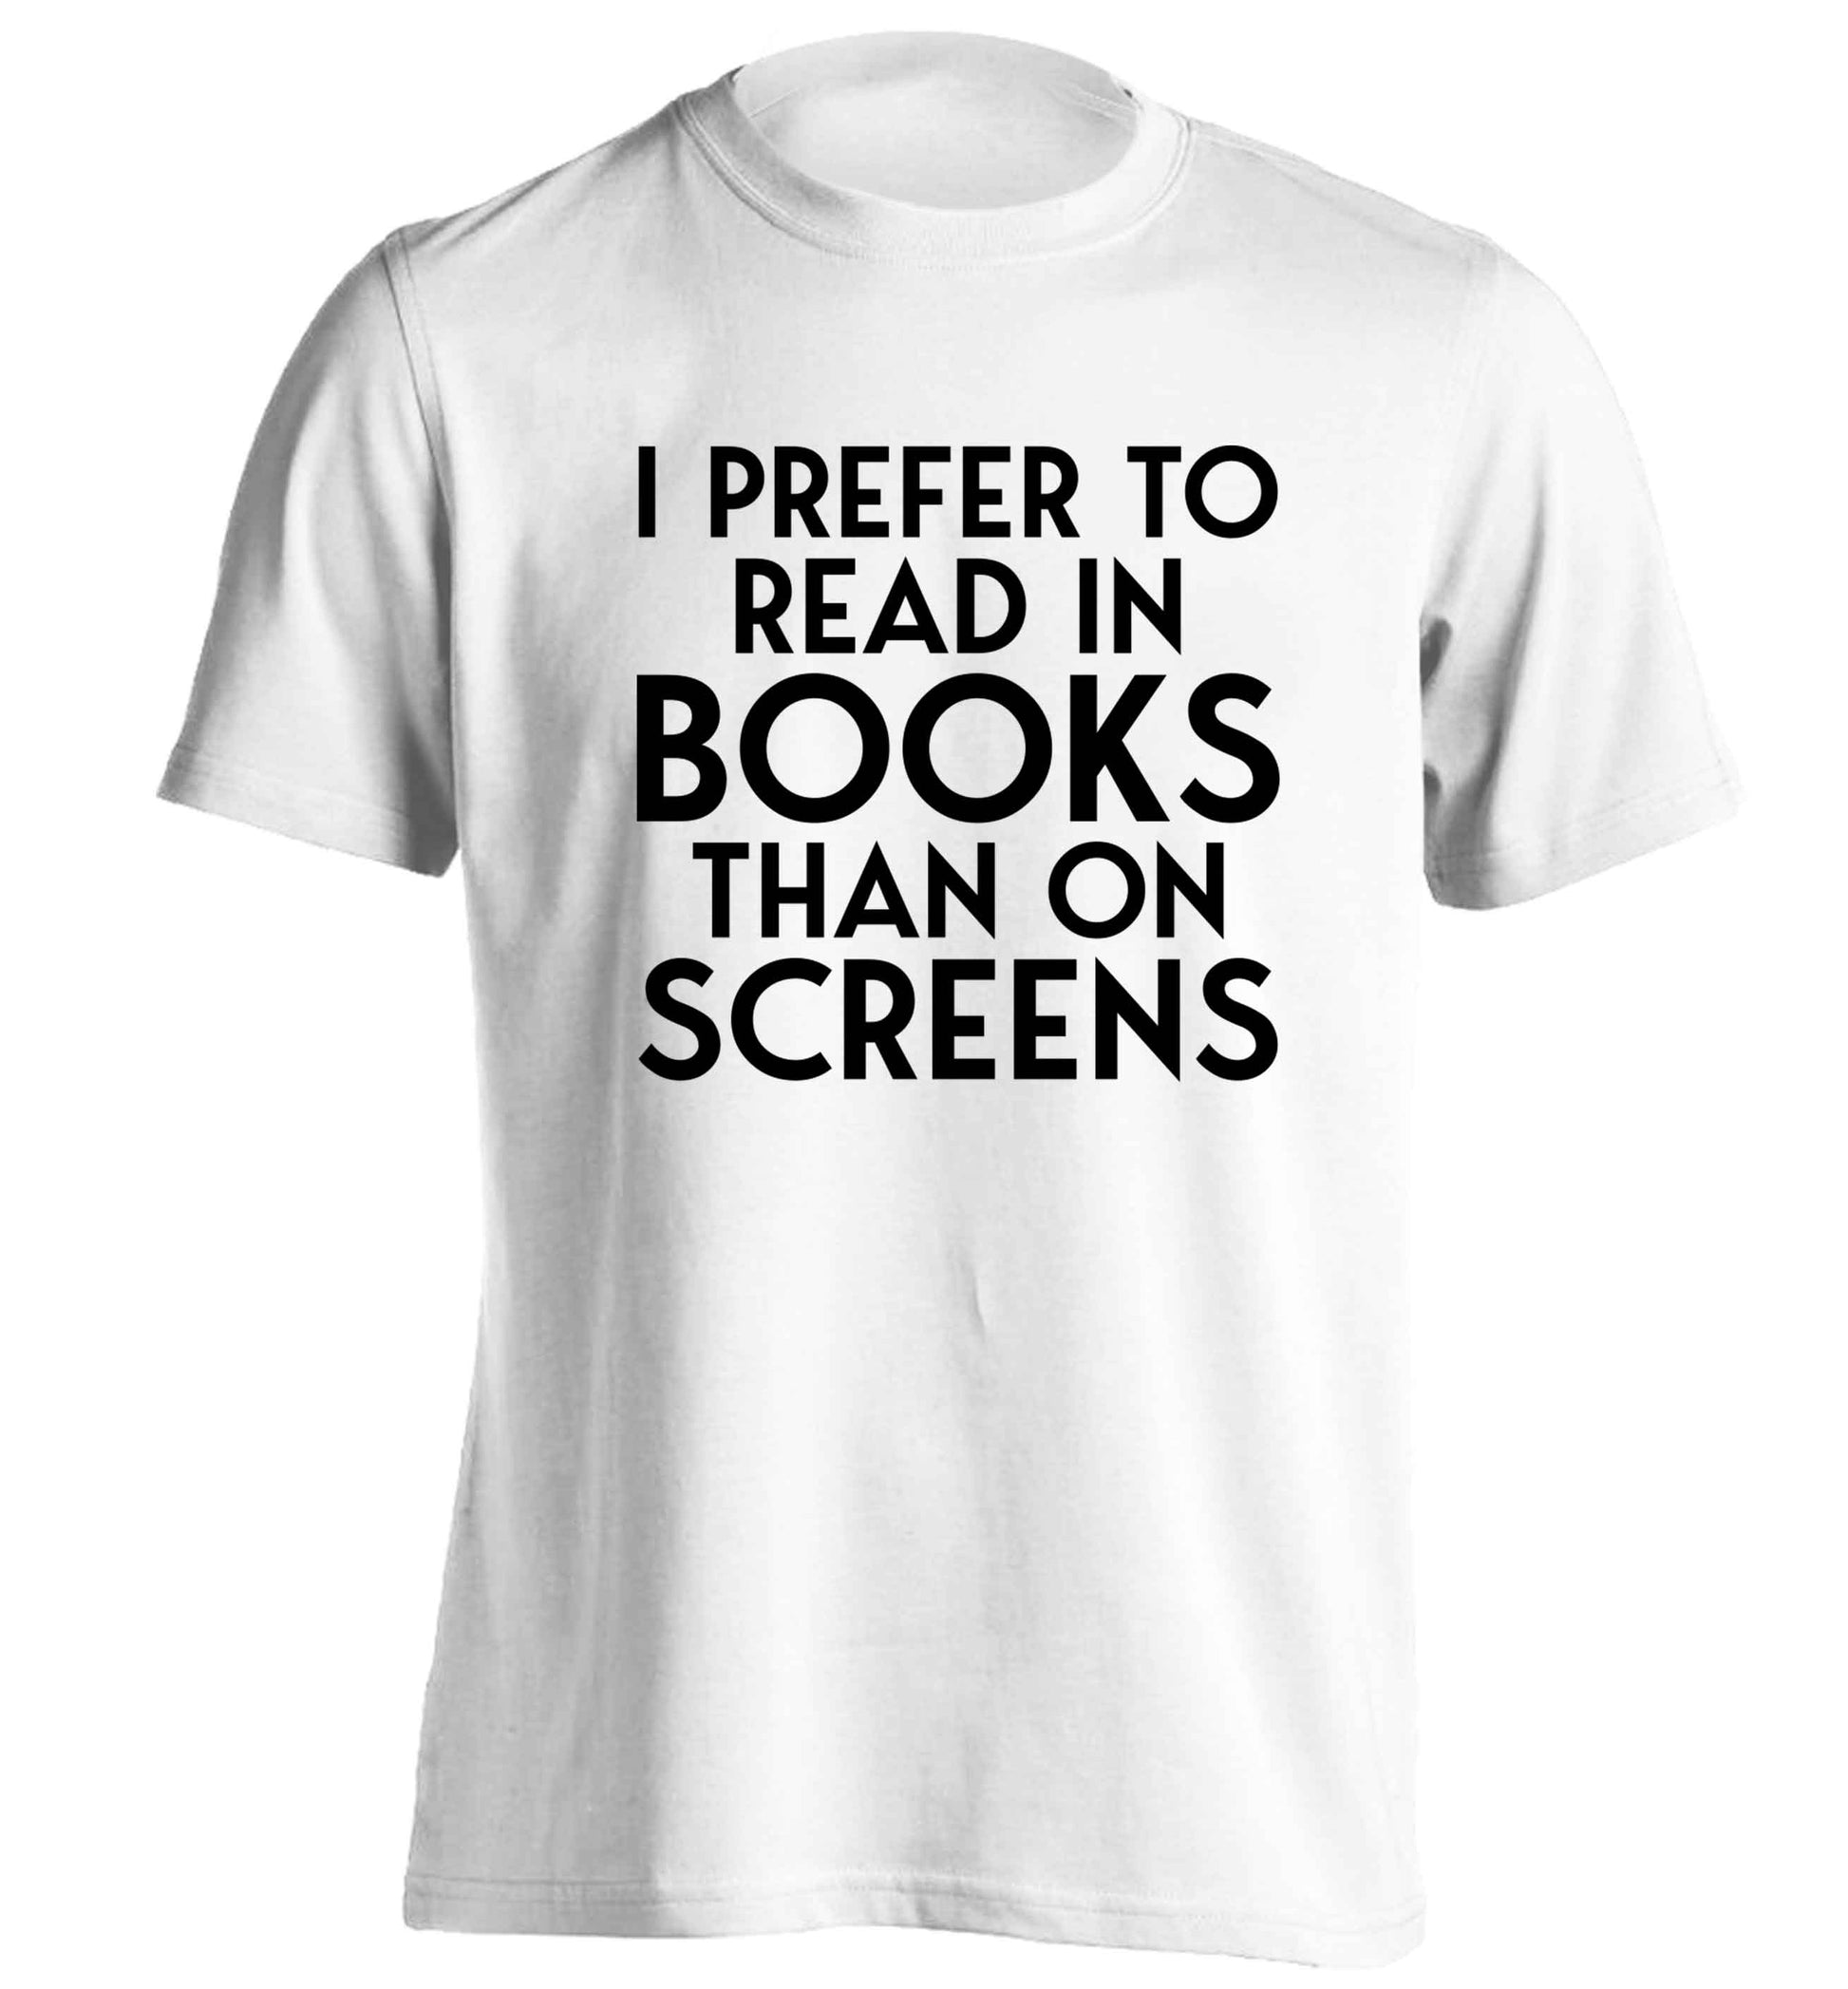 I prefer to read in books than on screens adults unisex white Tshirt 2XL